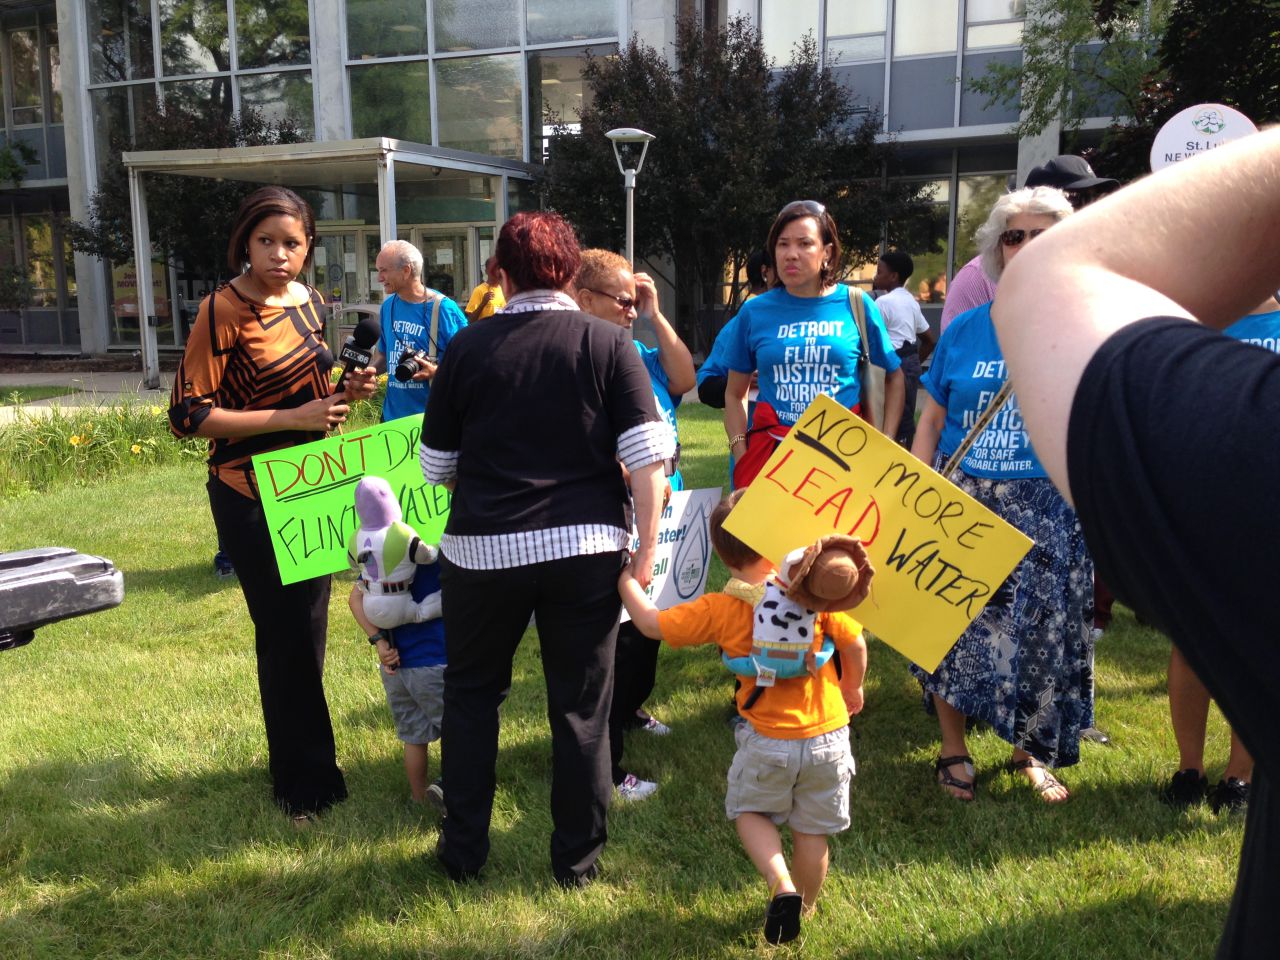 A Flint resident and her son are pictured at the Detroit to Flint Water Justice Journey rally in Flint, Michigan, July 10, 2015. (Courtesy of the author)